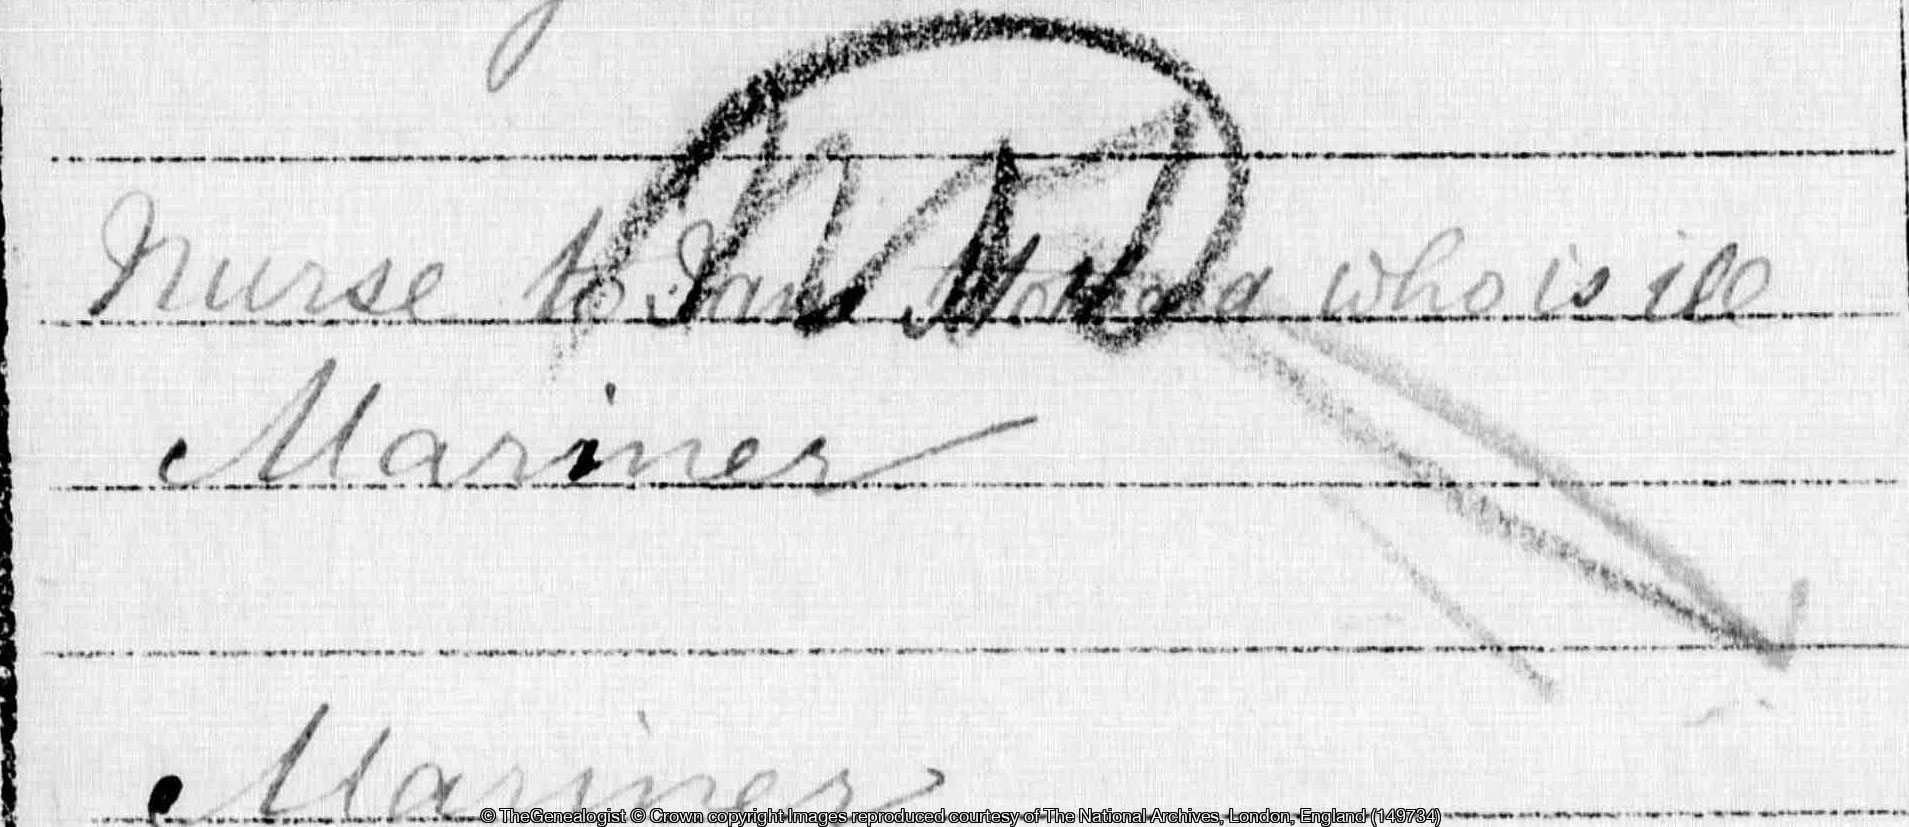 Detail from 1871 census of Goole, Yorkshire